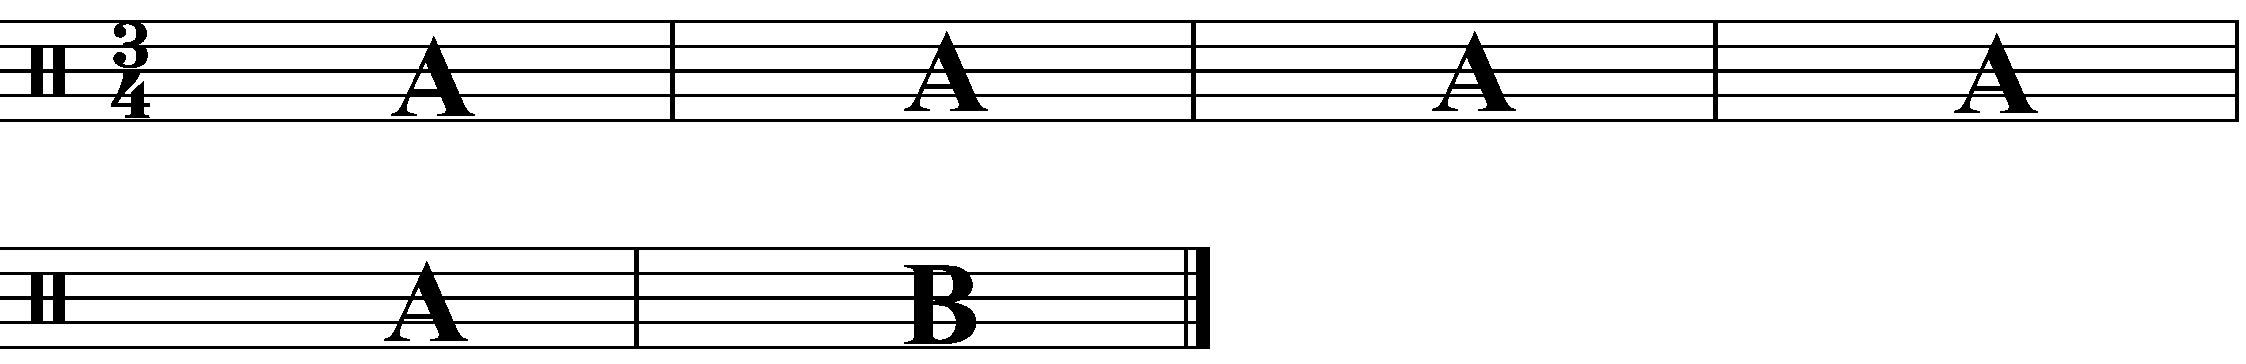 A six bar phrase made up 5 lots of A followed by a B.